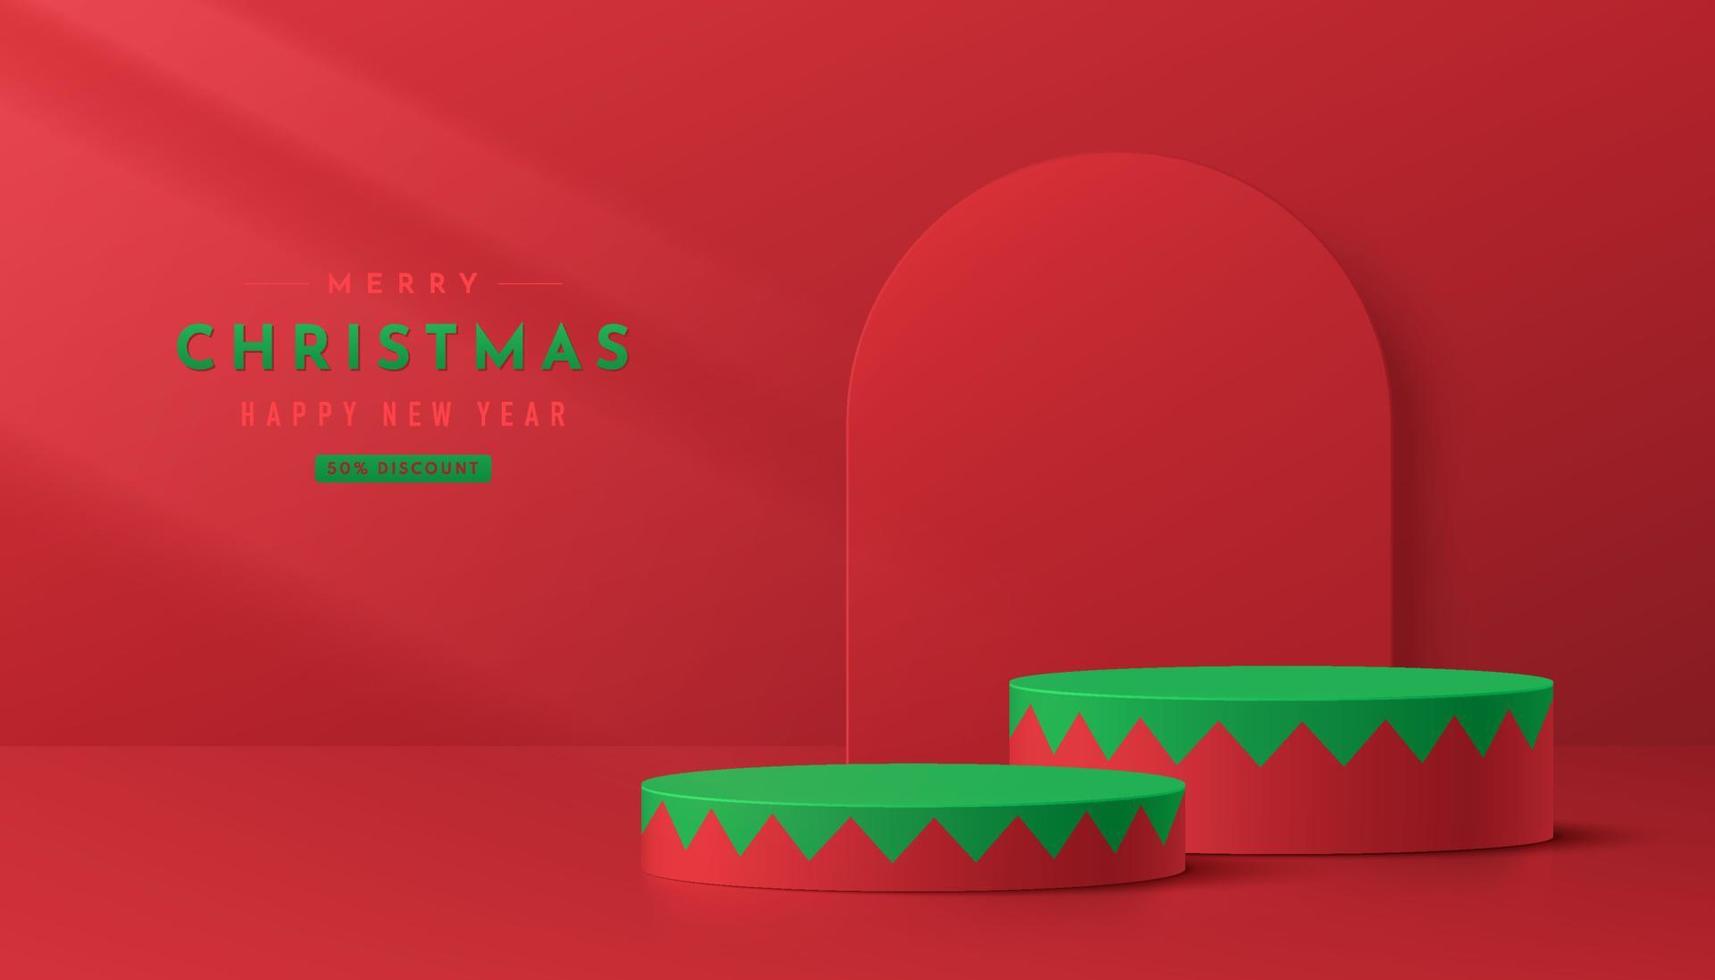 Realistic red, green 3D cylinder pedestal podium in serrated pattern style. Merry christmas concept. Abstract minimal scene mockup products, stage showcase, promotion display. Vector geometric forms.